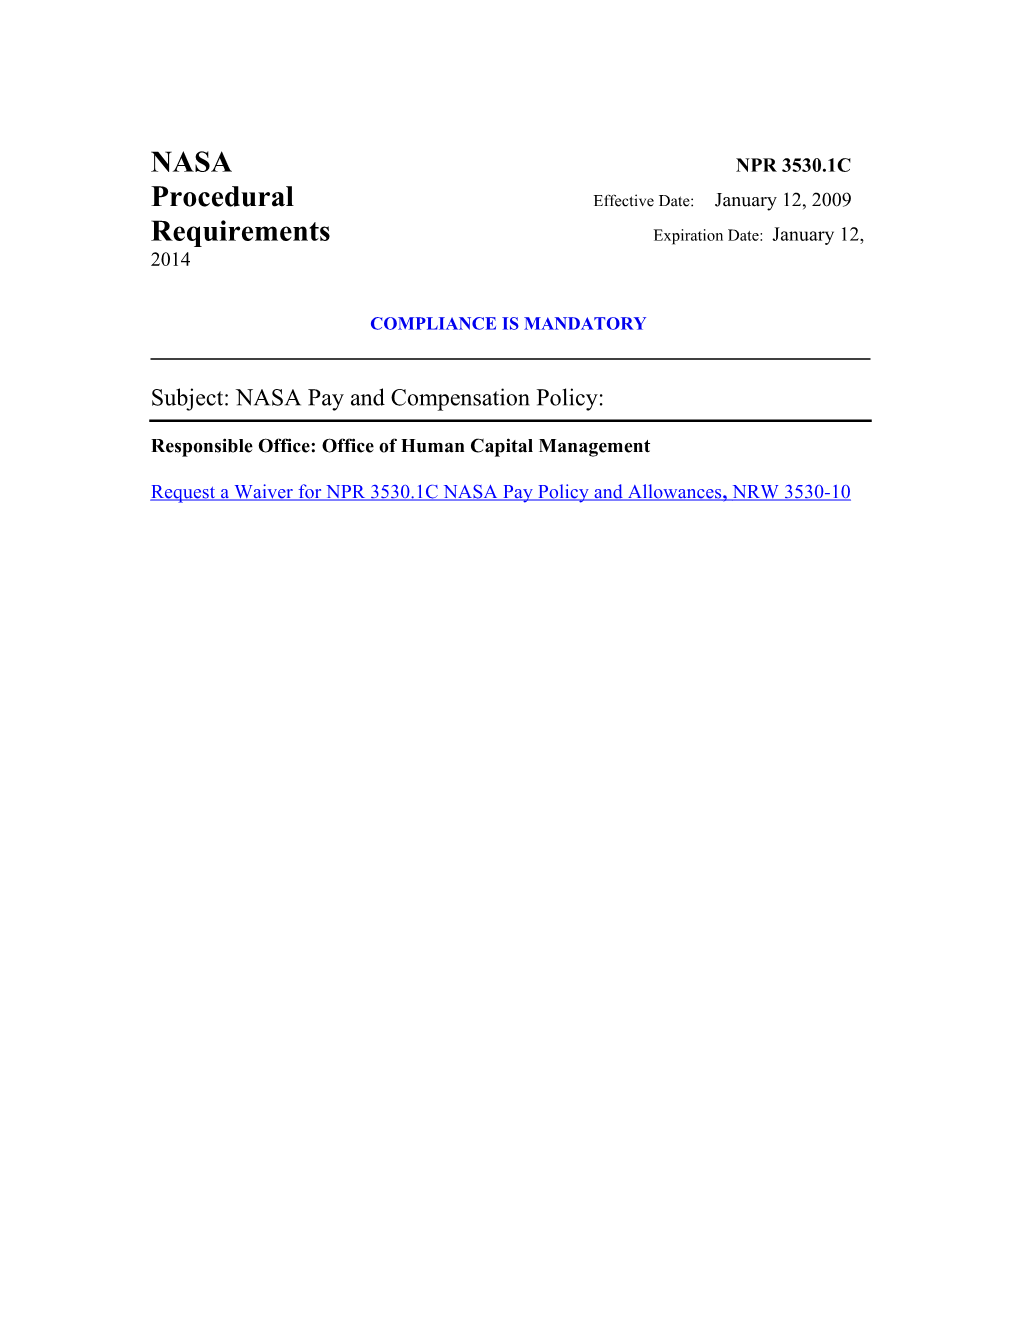 Subject: NASA Pay and Compensation Policy